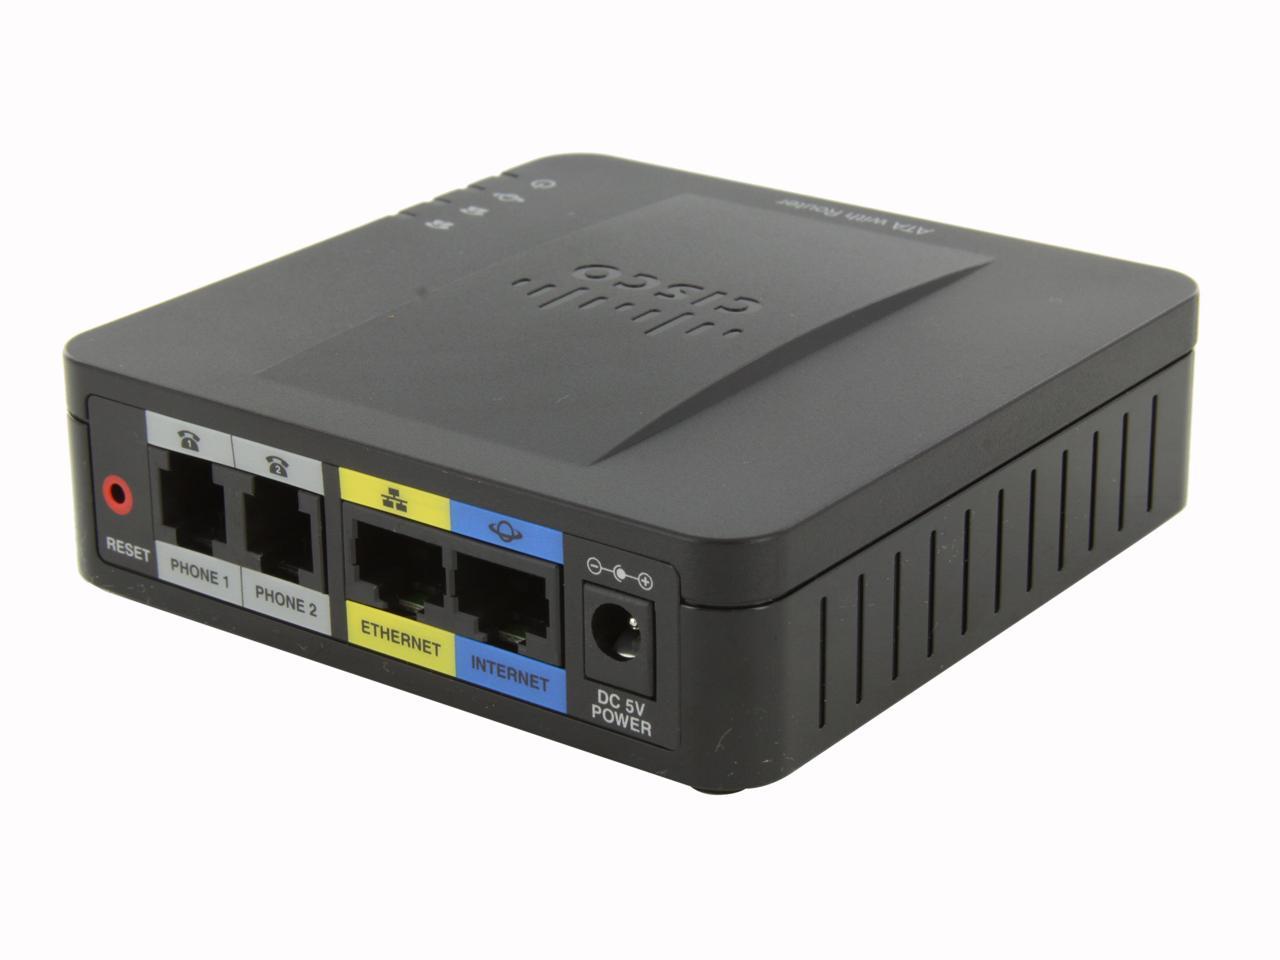 Cisco Small Business SPA122 ATA with Router - Newegg.ca